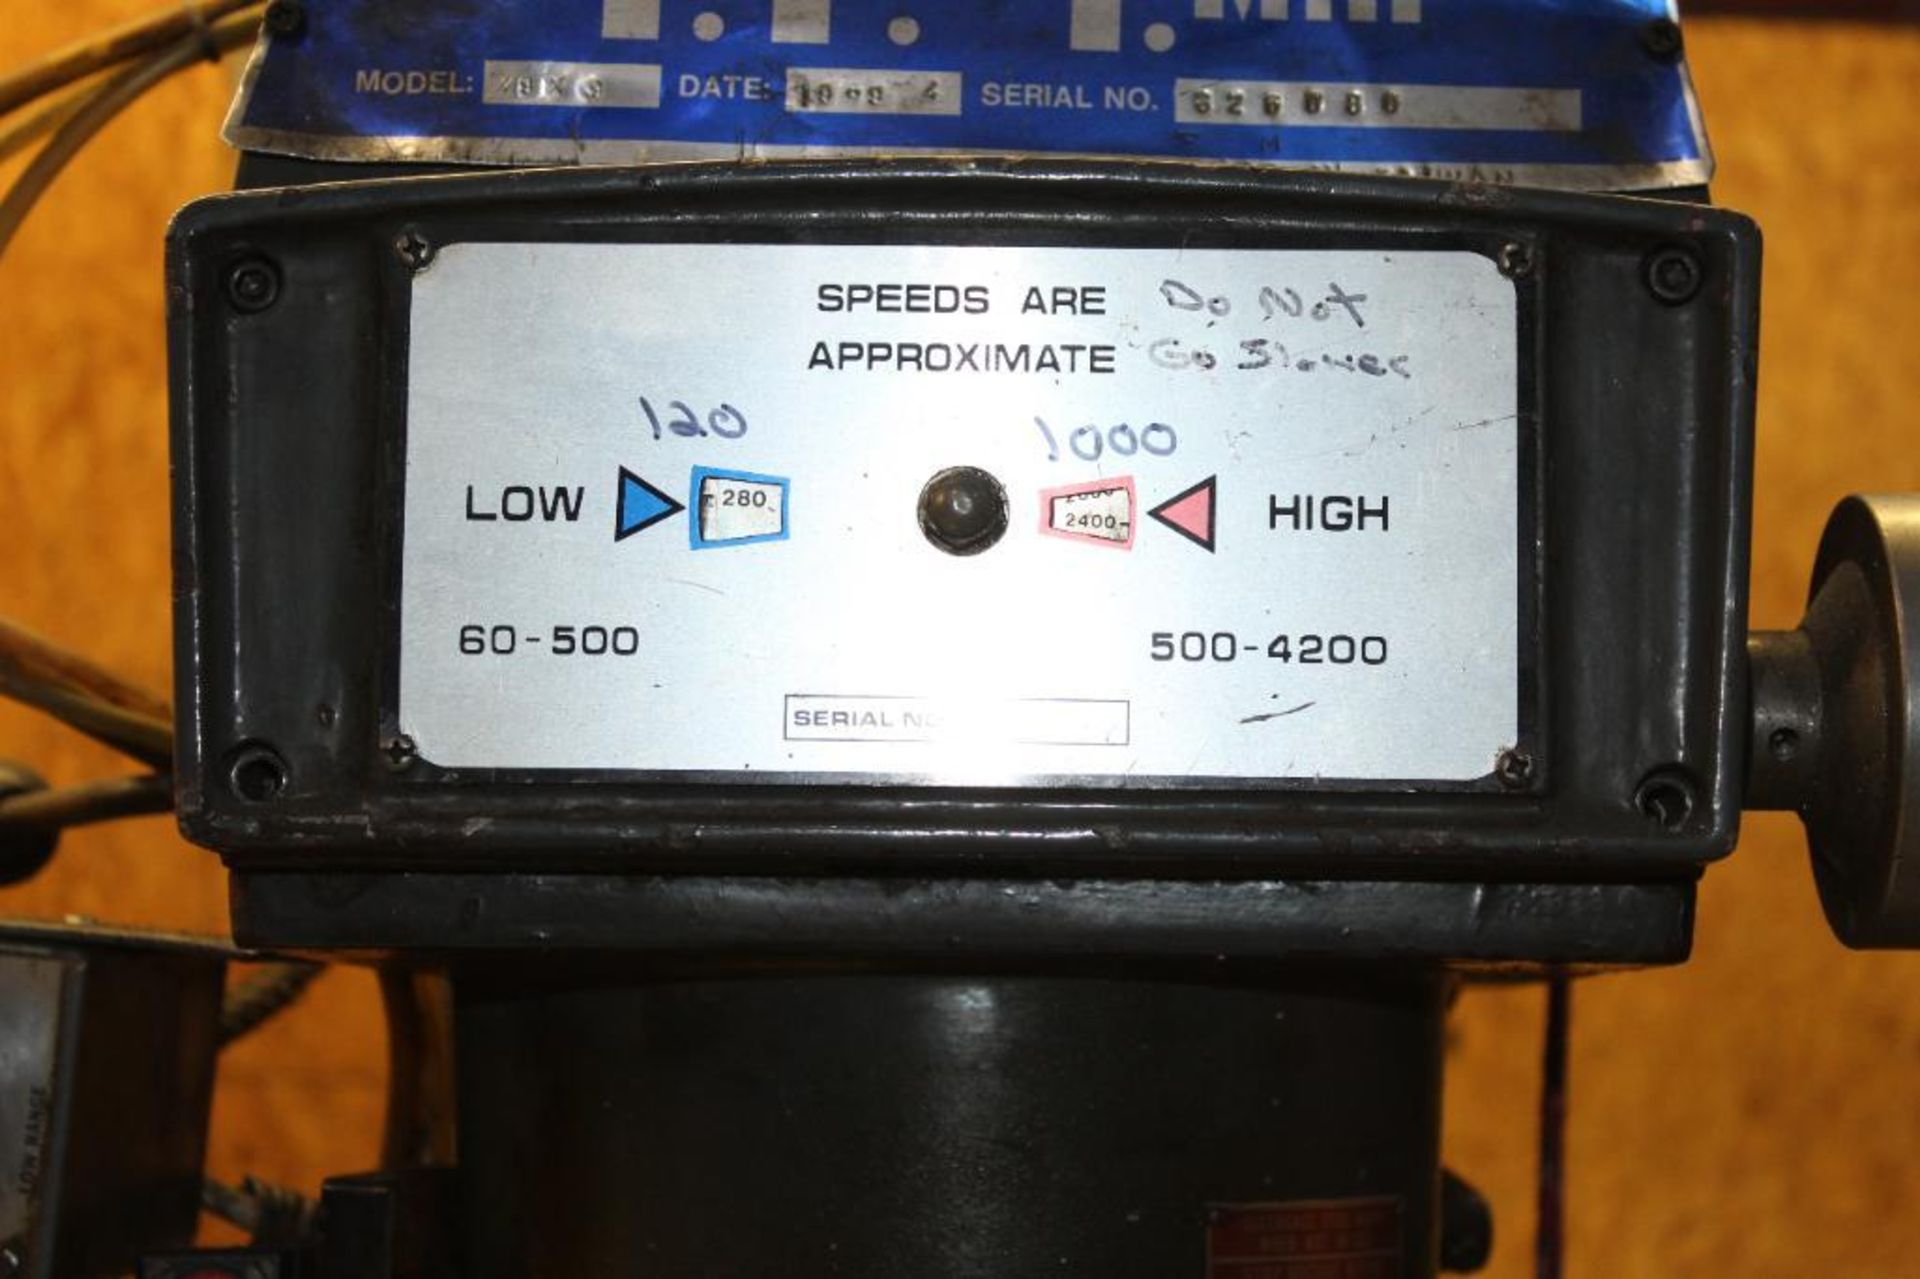 1988 T.F.Y. Lincoln Knee Mill Model 19X9 with 2-Axis Sorgon Digital Readout - Image 5 of 15